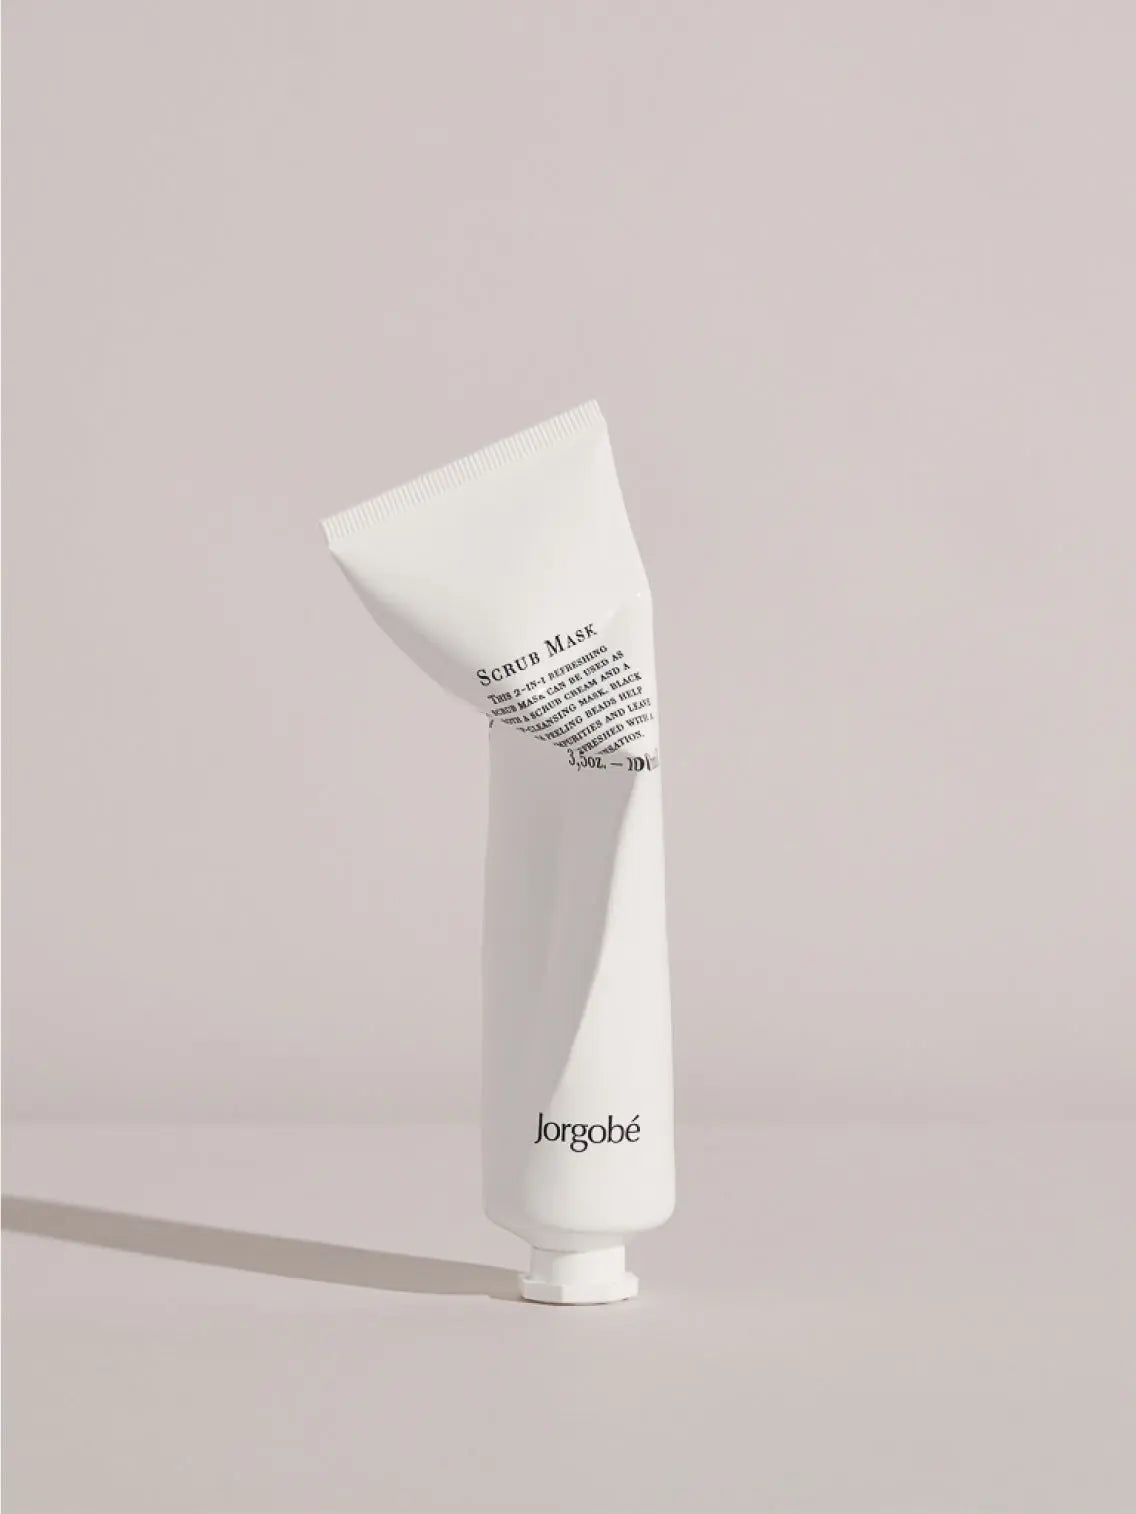 A white tube of Jorgobé Refreshing Scrub Mask 100ml stands next to its matching white and black polka-dotted box. Both the tube and the box display product information and volume (3.4 oz./100 ml). The tube has a white flip-top cap and is available at Bassalstore in Barcelona.